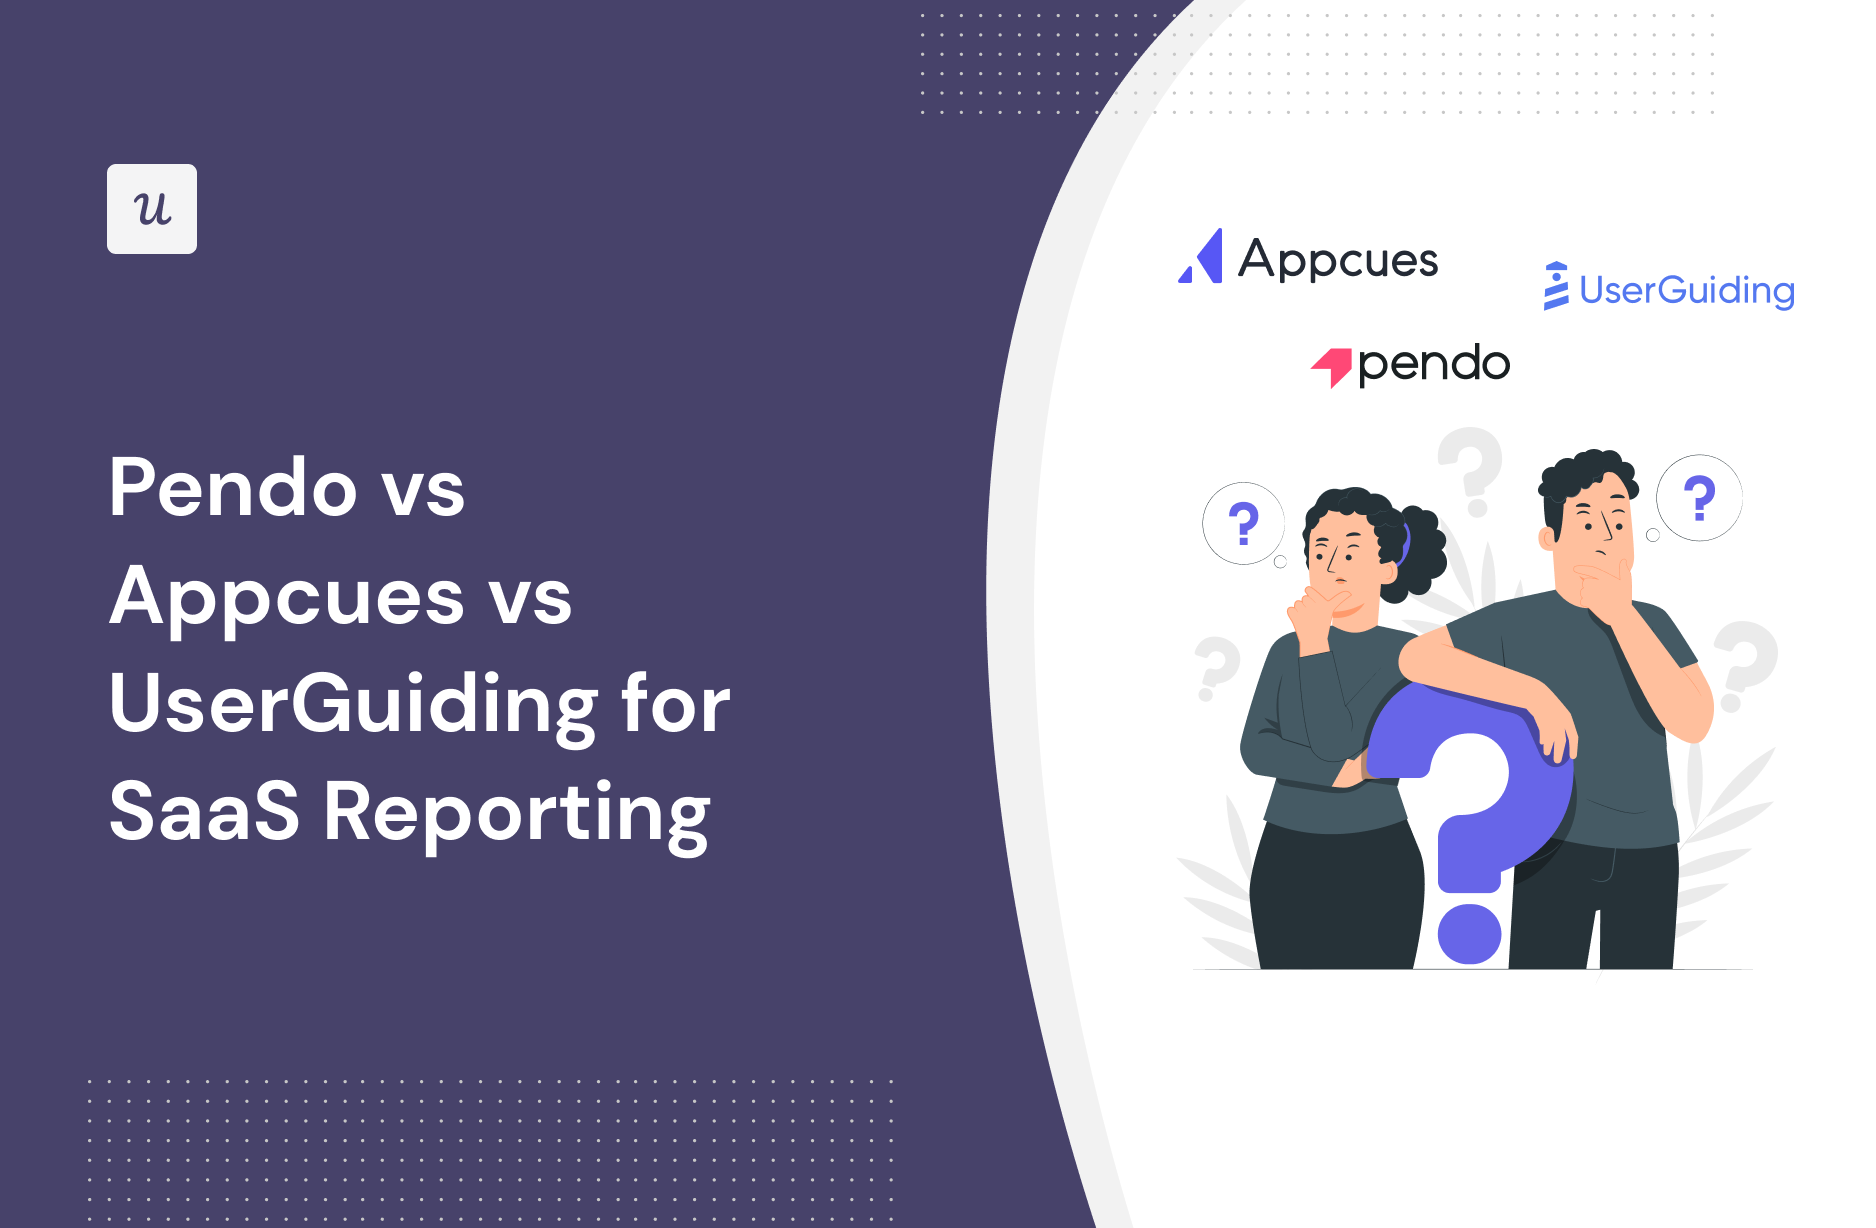 Pendo vs Appcues vs UserGuiding for SaaS Reporting